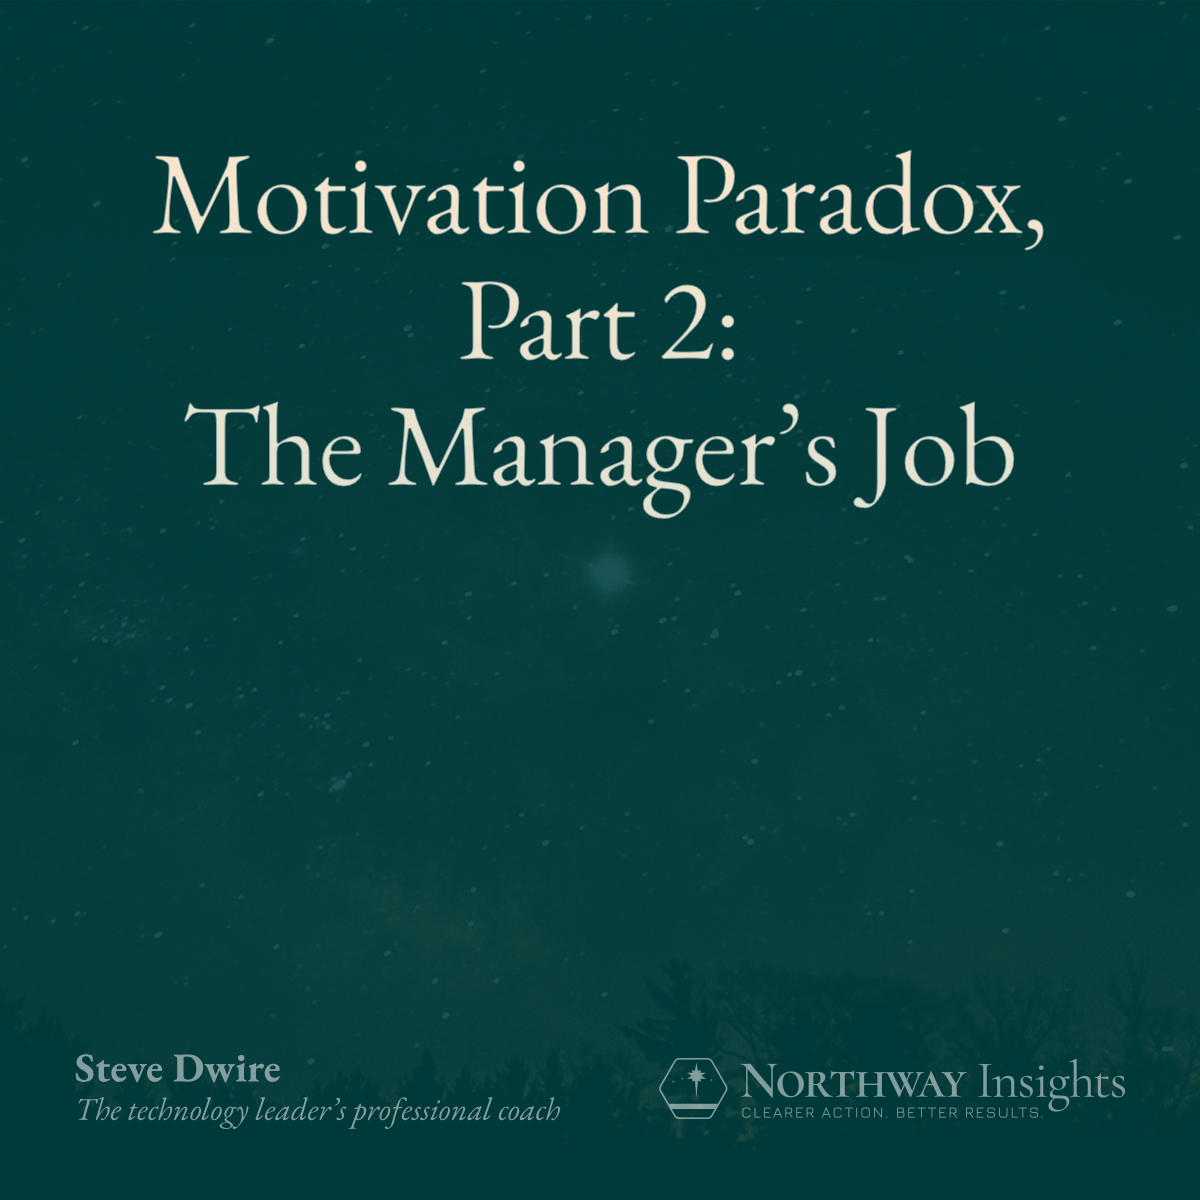 Motivation Paradox, Part 2: The Manager's Job